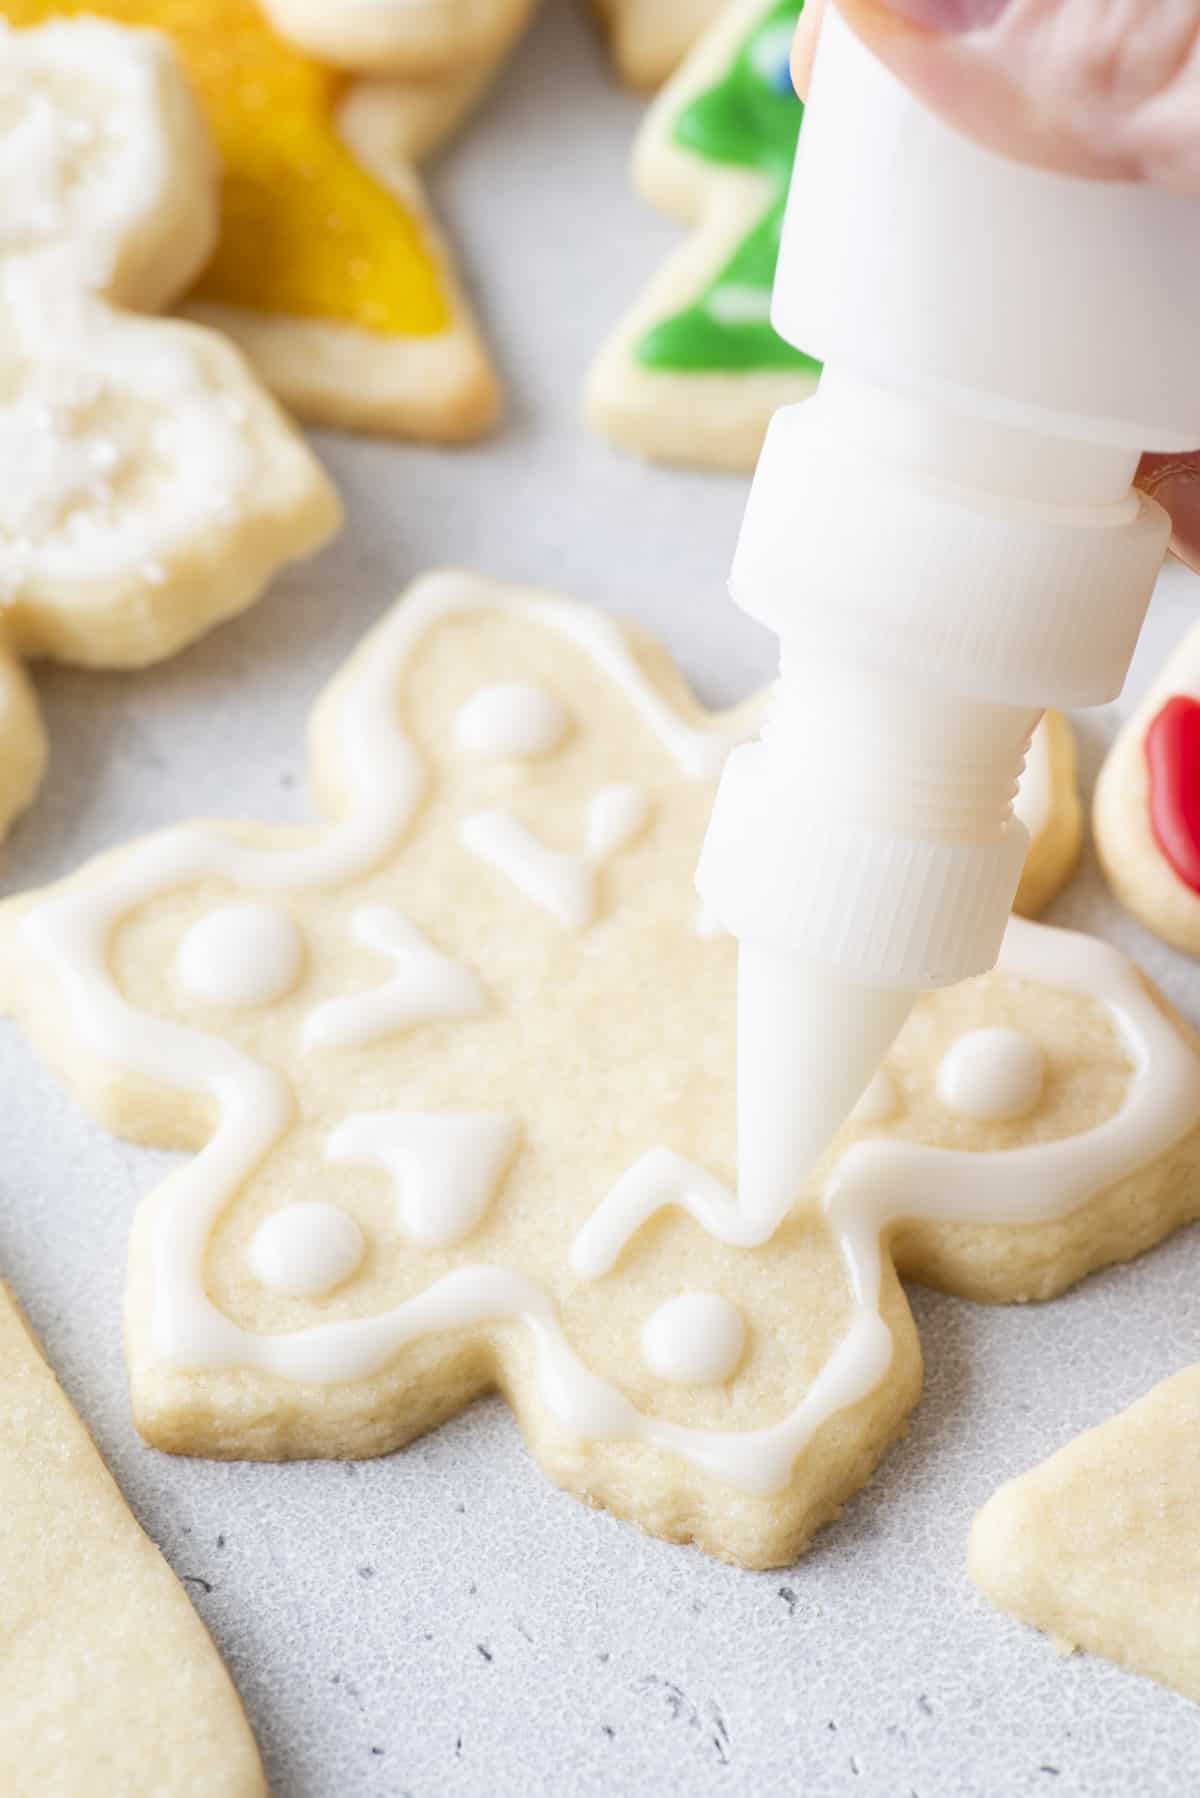 white royal icing being piped onto a snowflake shaped cookie with a squeeze bottle